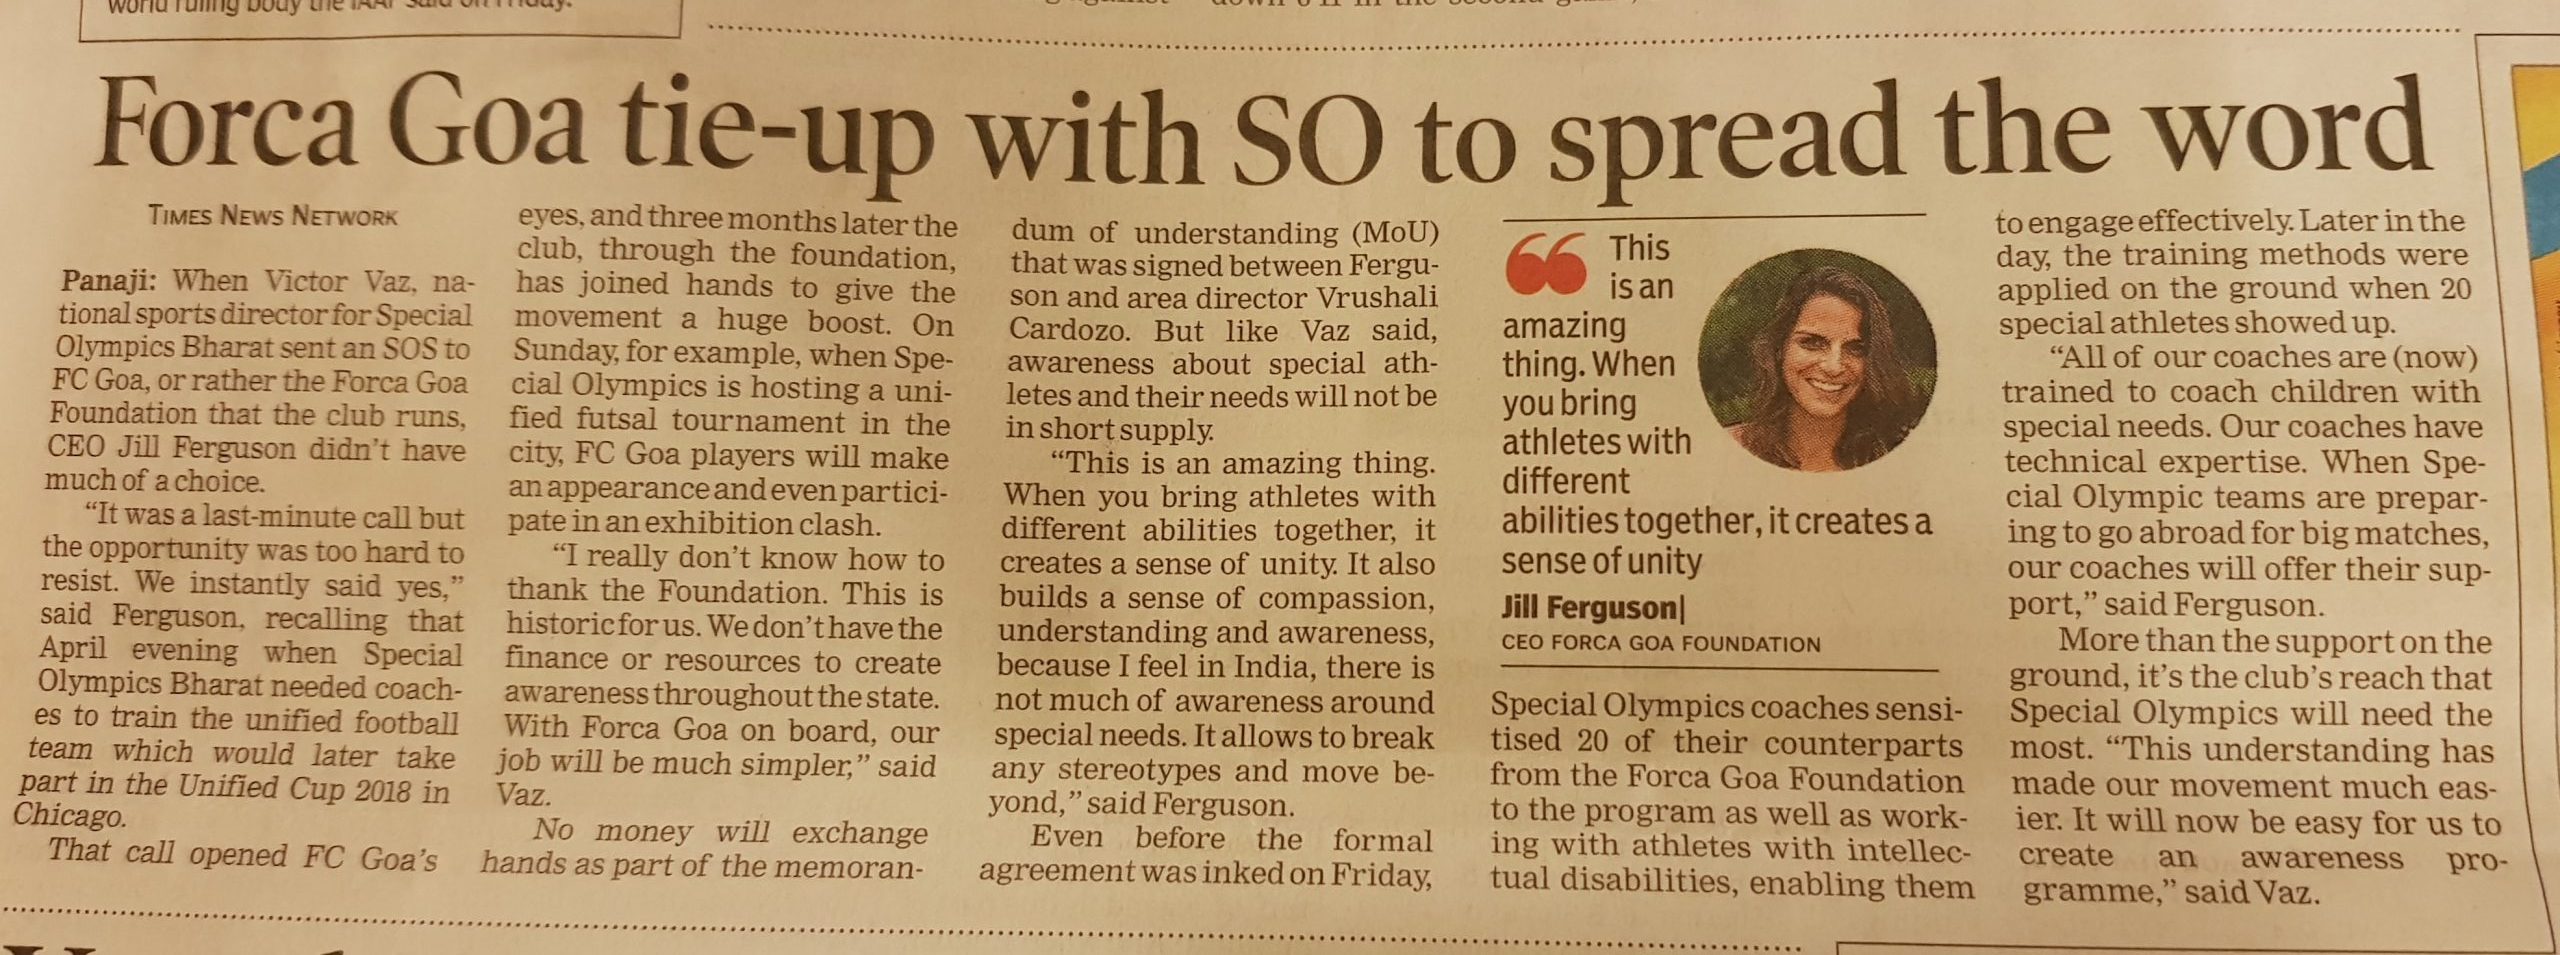 Forca Goa join tie-up with SO to spread the word